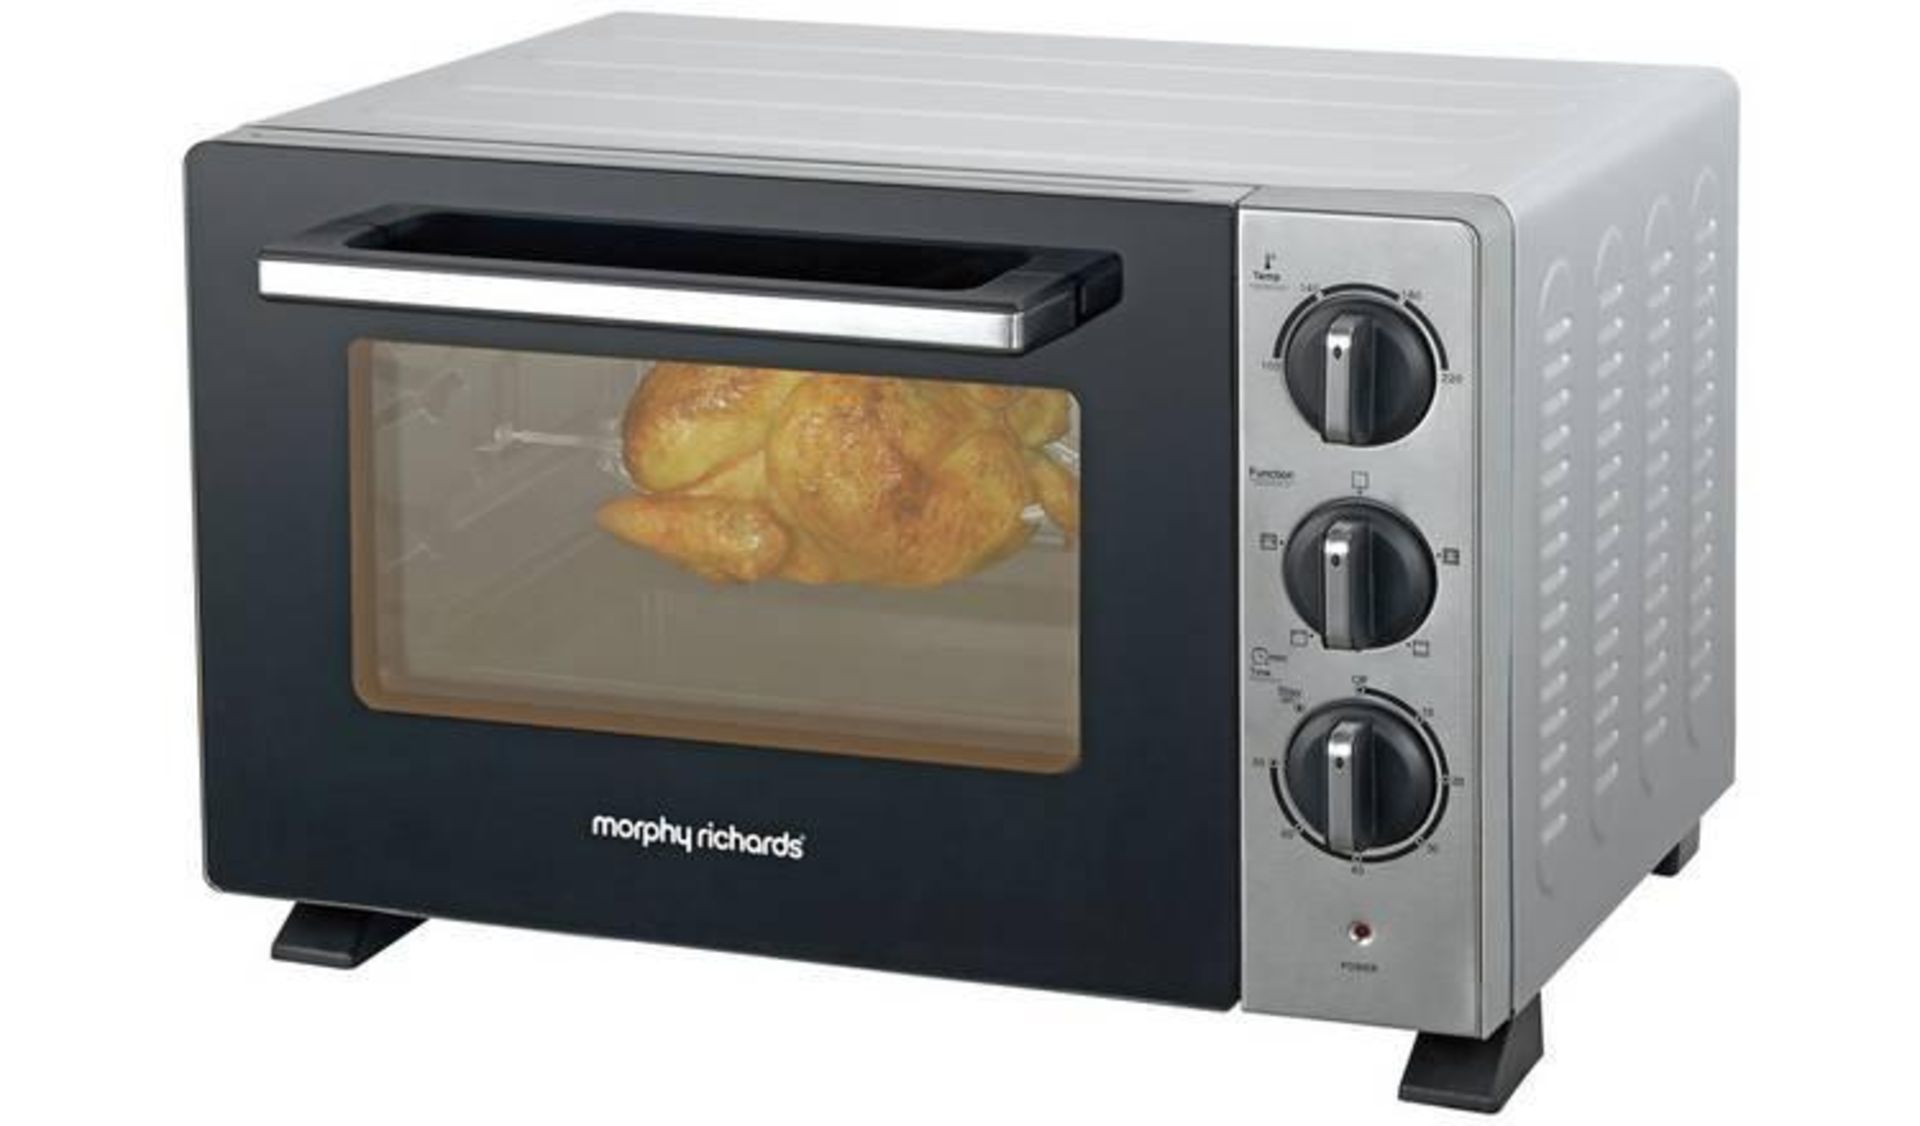 Morphy Richards 23L Rotisserie Mini Oven with Light - £84.99 RRP